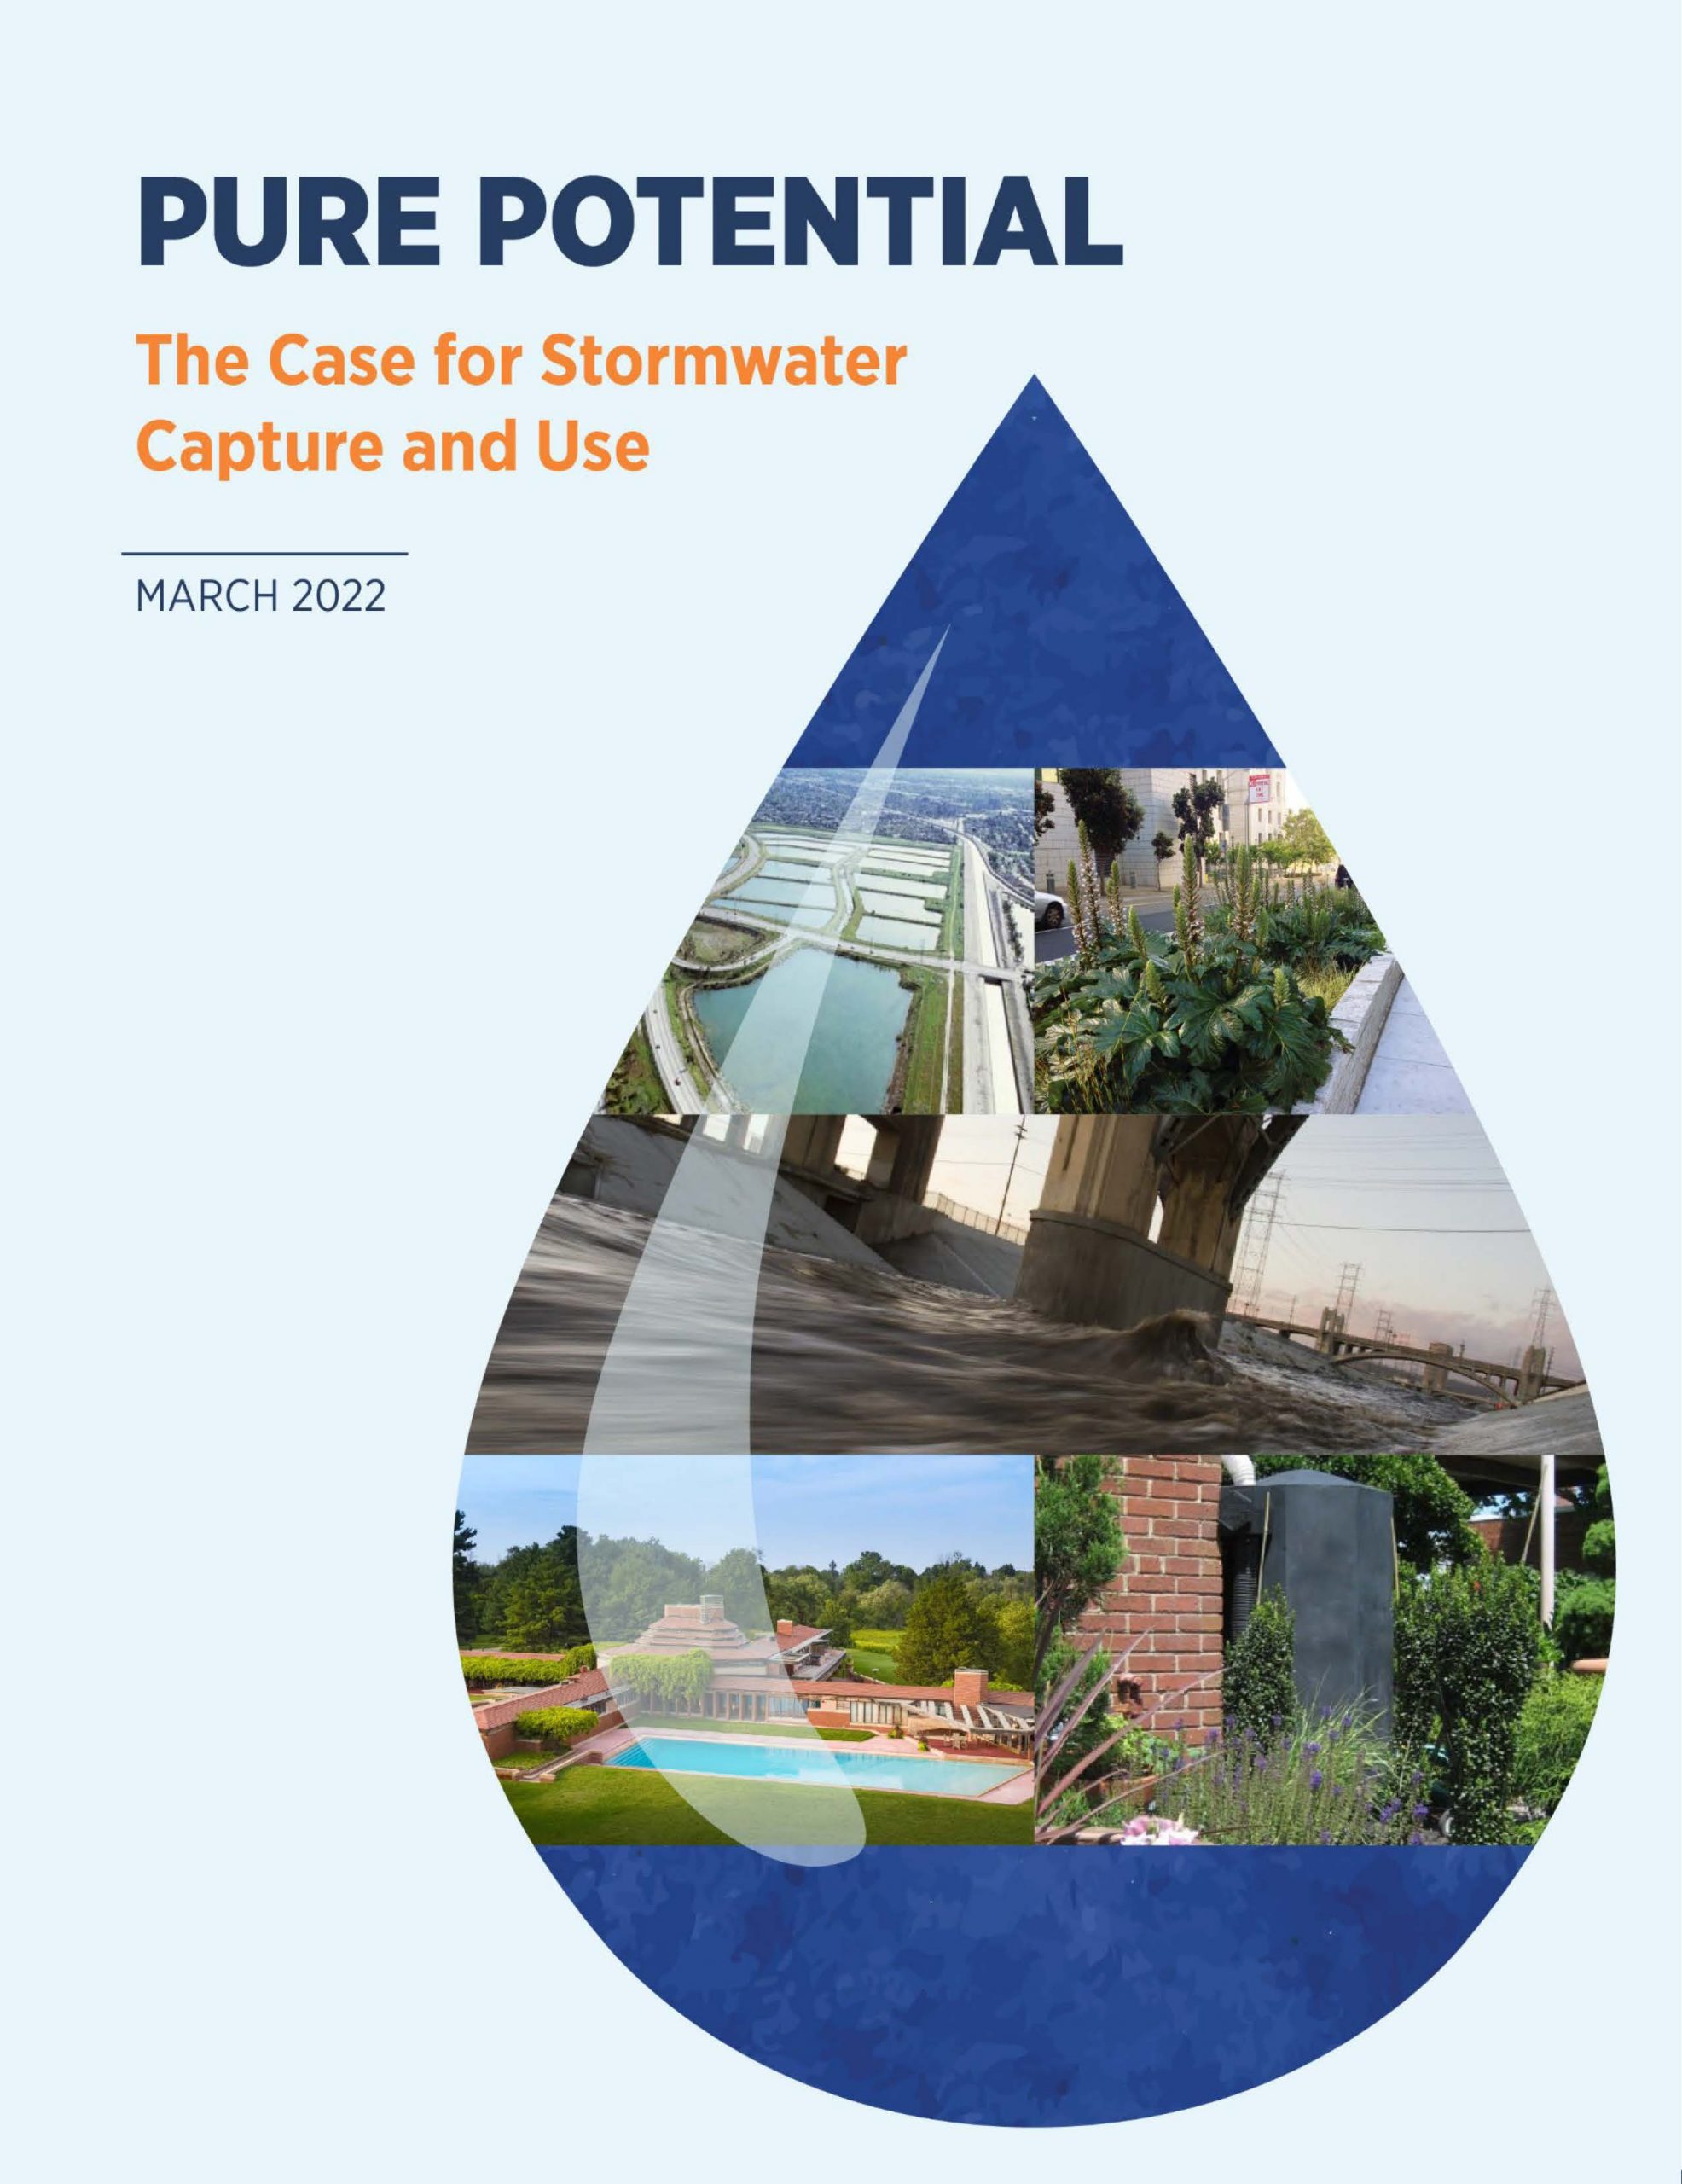 Stormwater Capture and Use Report Identifies and Addresses Roadblocks